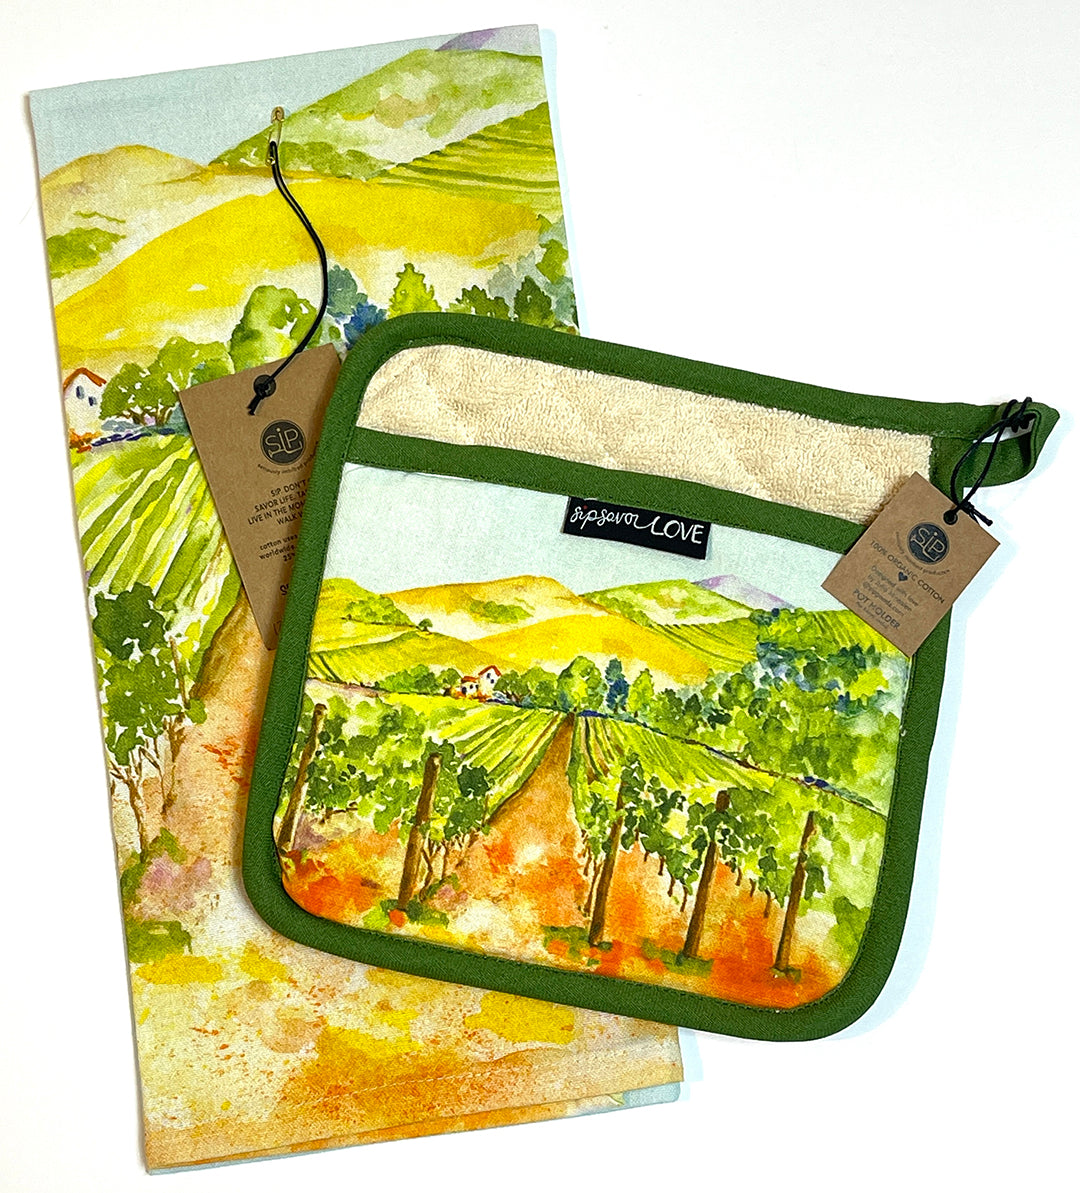 "Among The Vines" Kitchen Towel